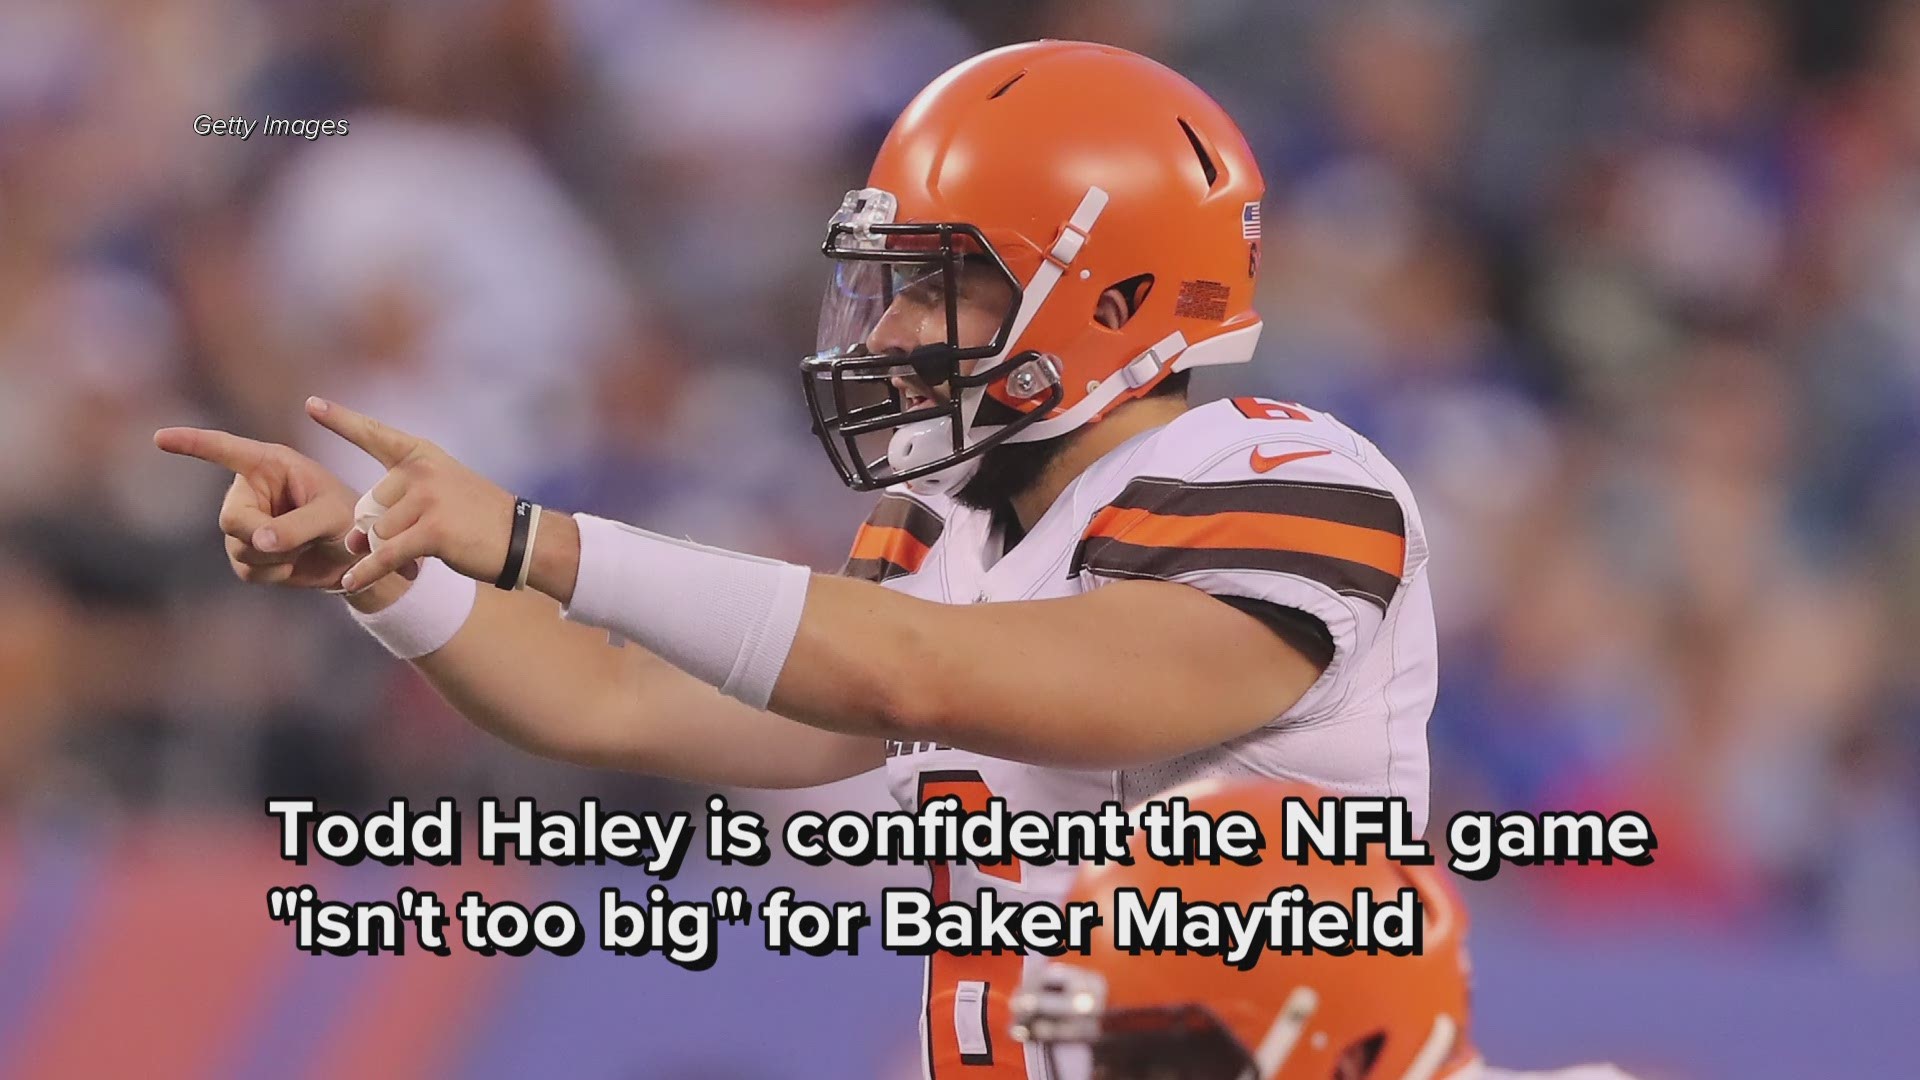 Todd Haley: NFL game 'isn't too big' for Cleveland Browns rookie QB Baker Mayfield